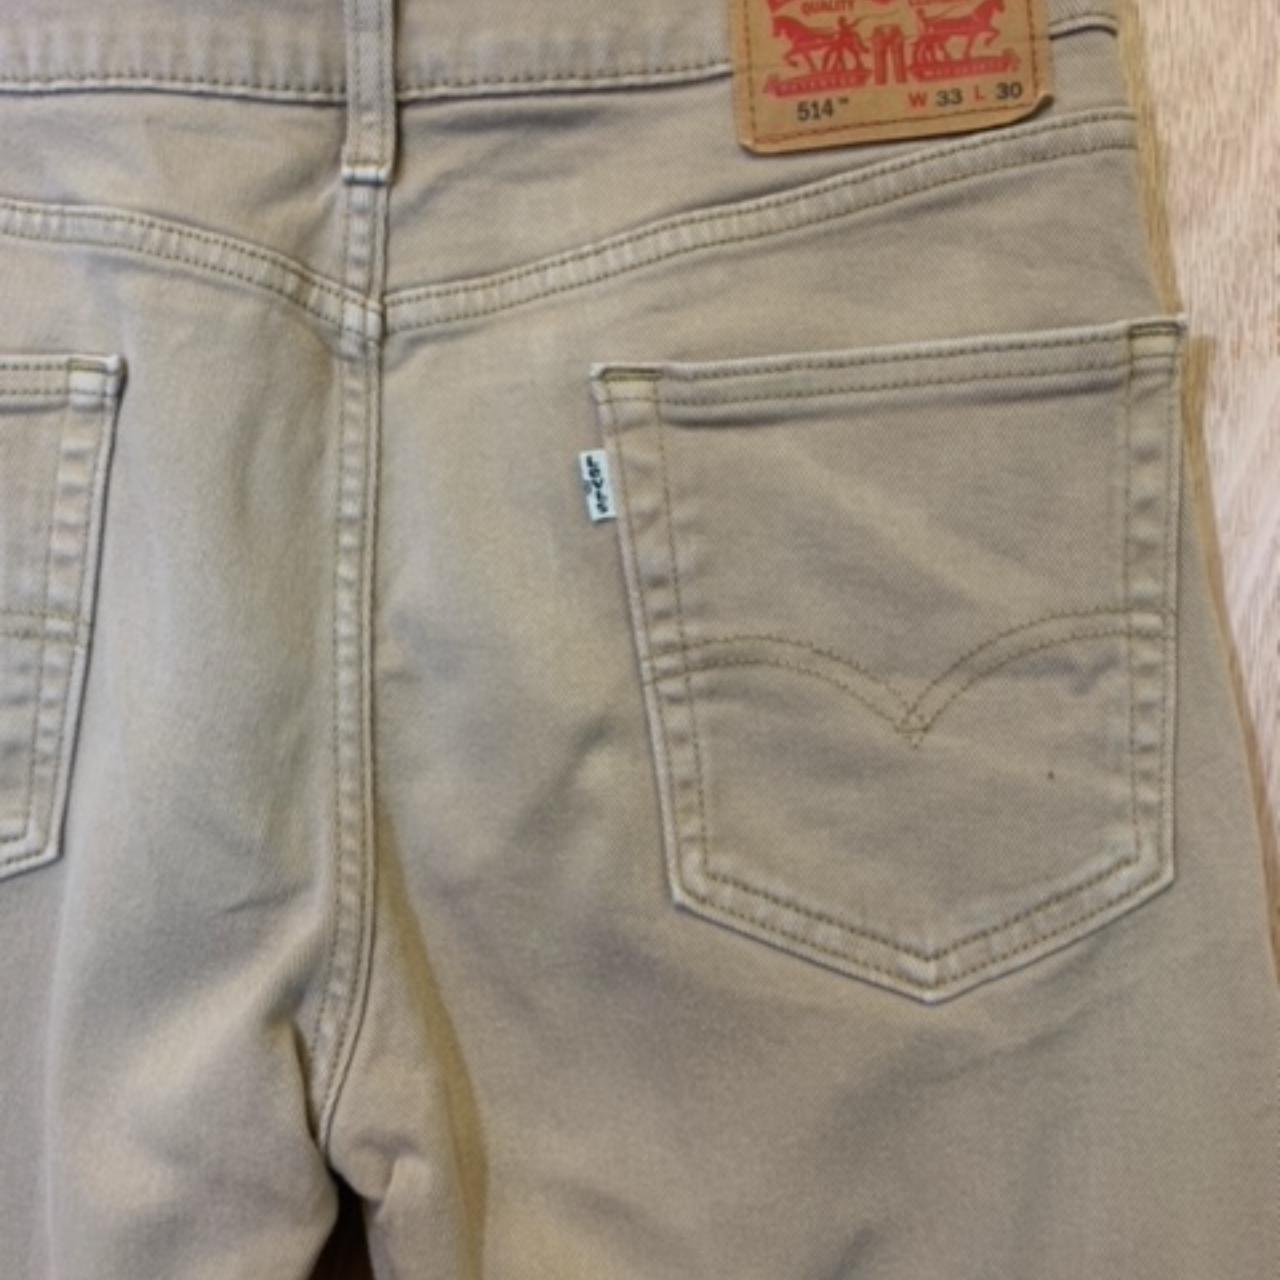 Product Image 1 - Levi's Strauss Co. 514 size